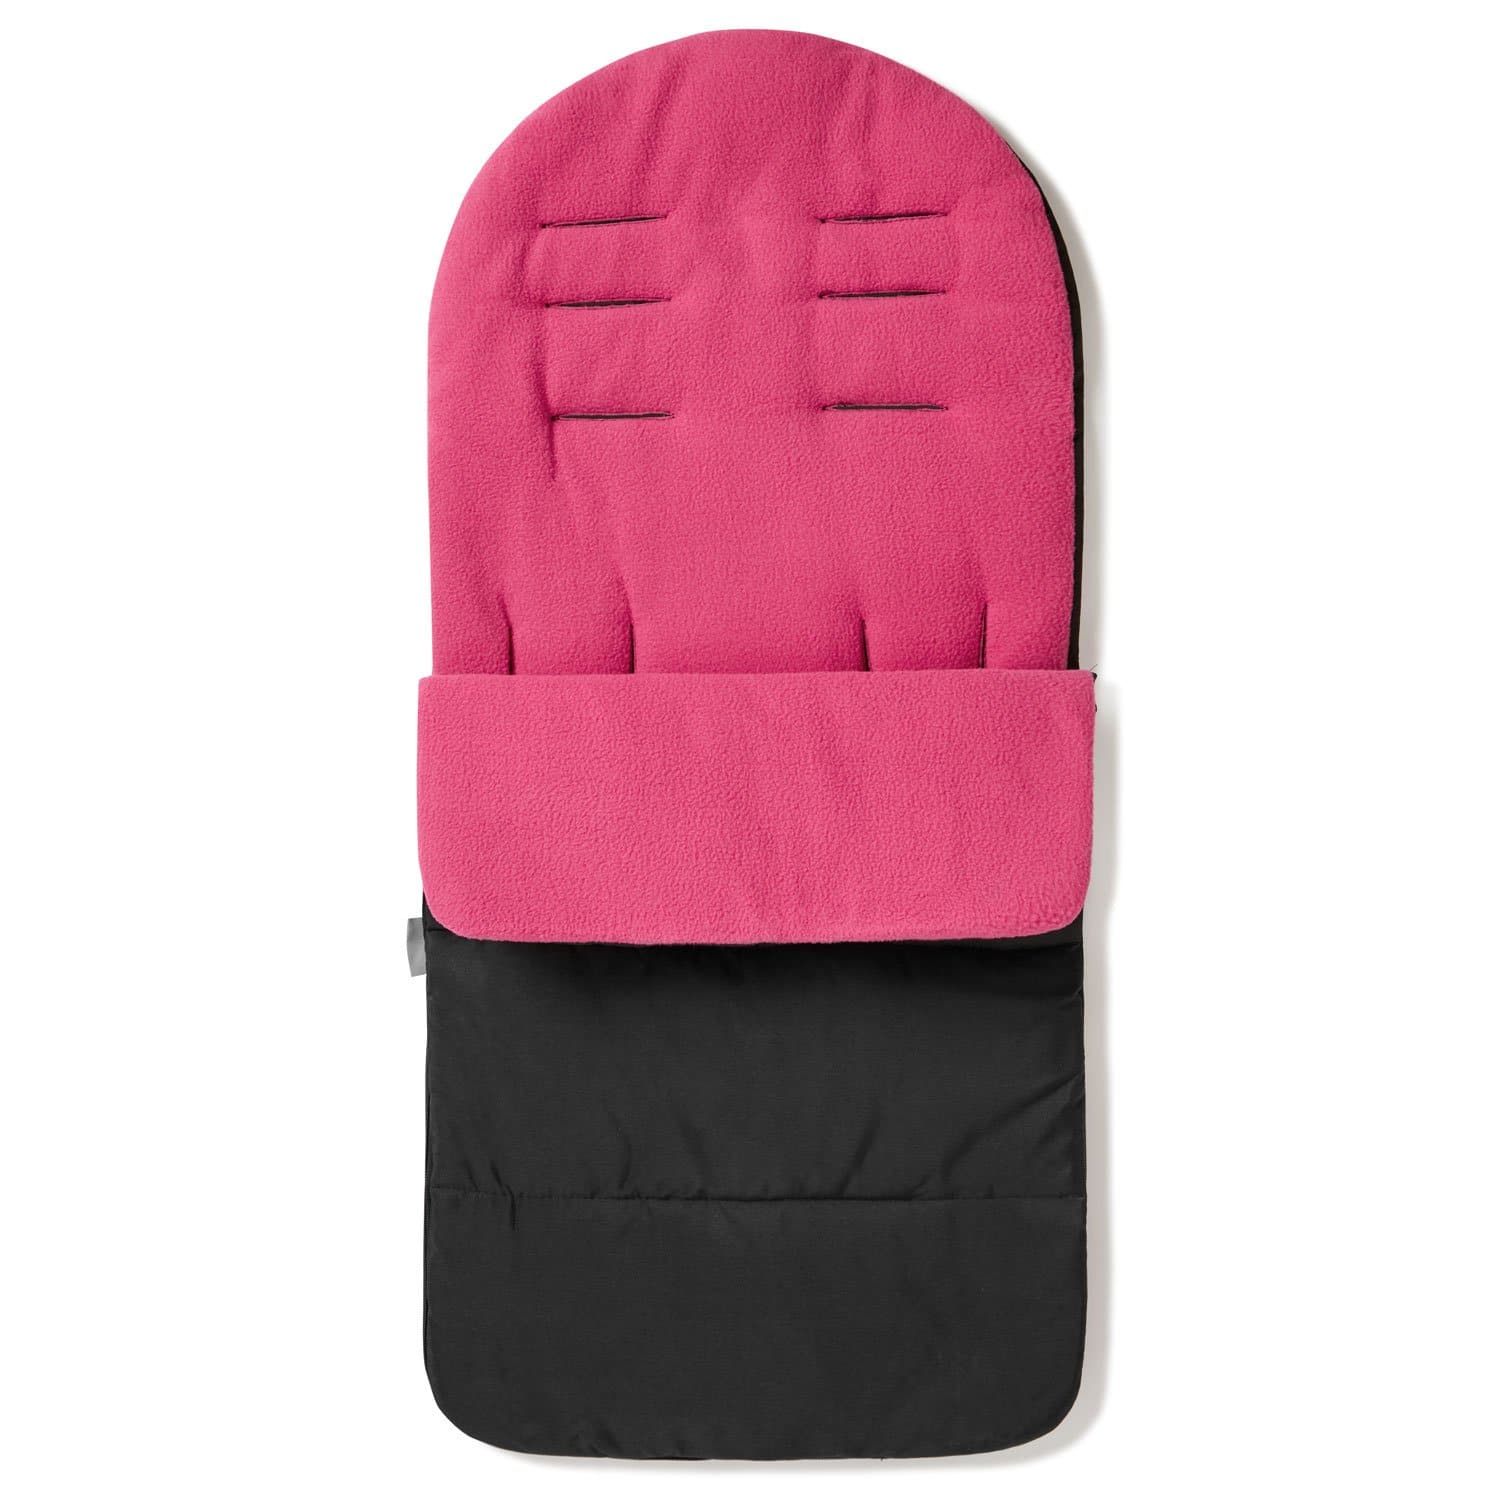 Premium Footmuff / Cosy Toes Compatible with Infababy - Pink Rose / Fits All Models | For Your Little One